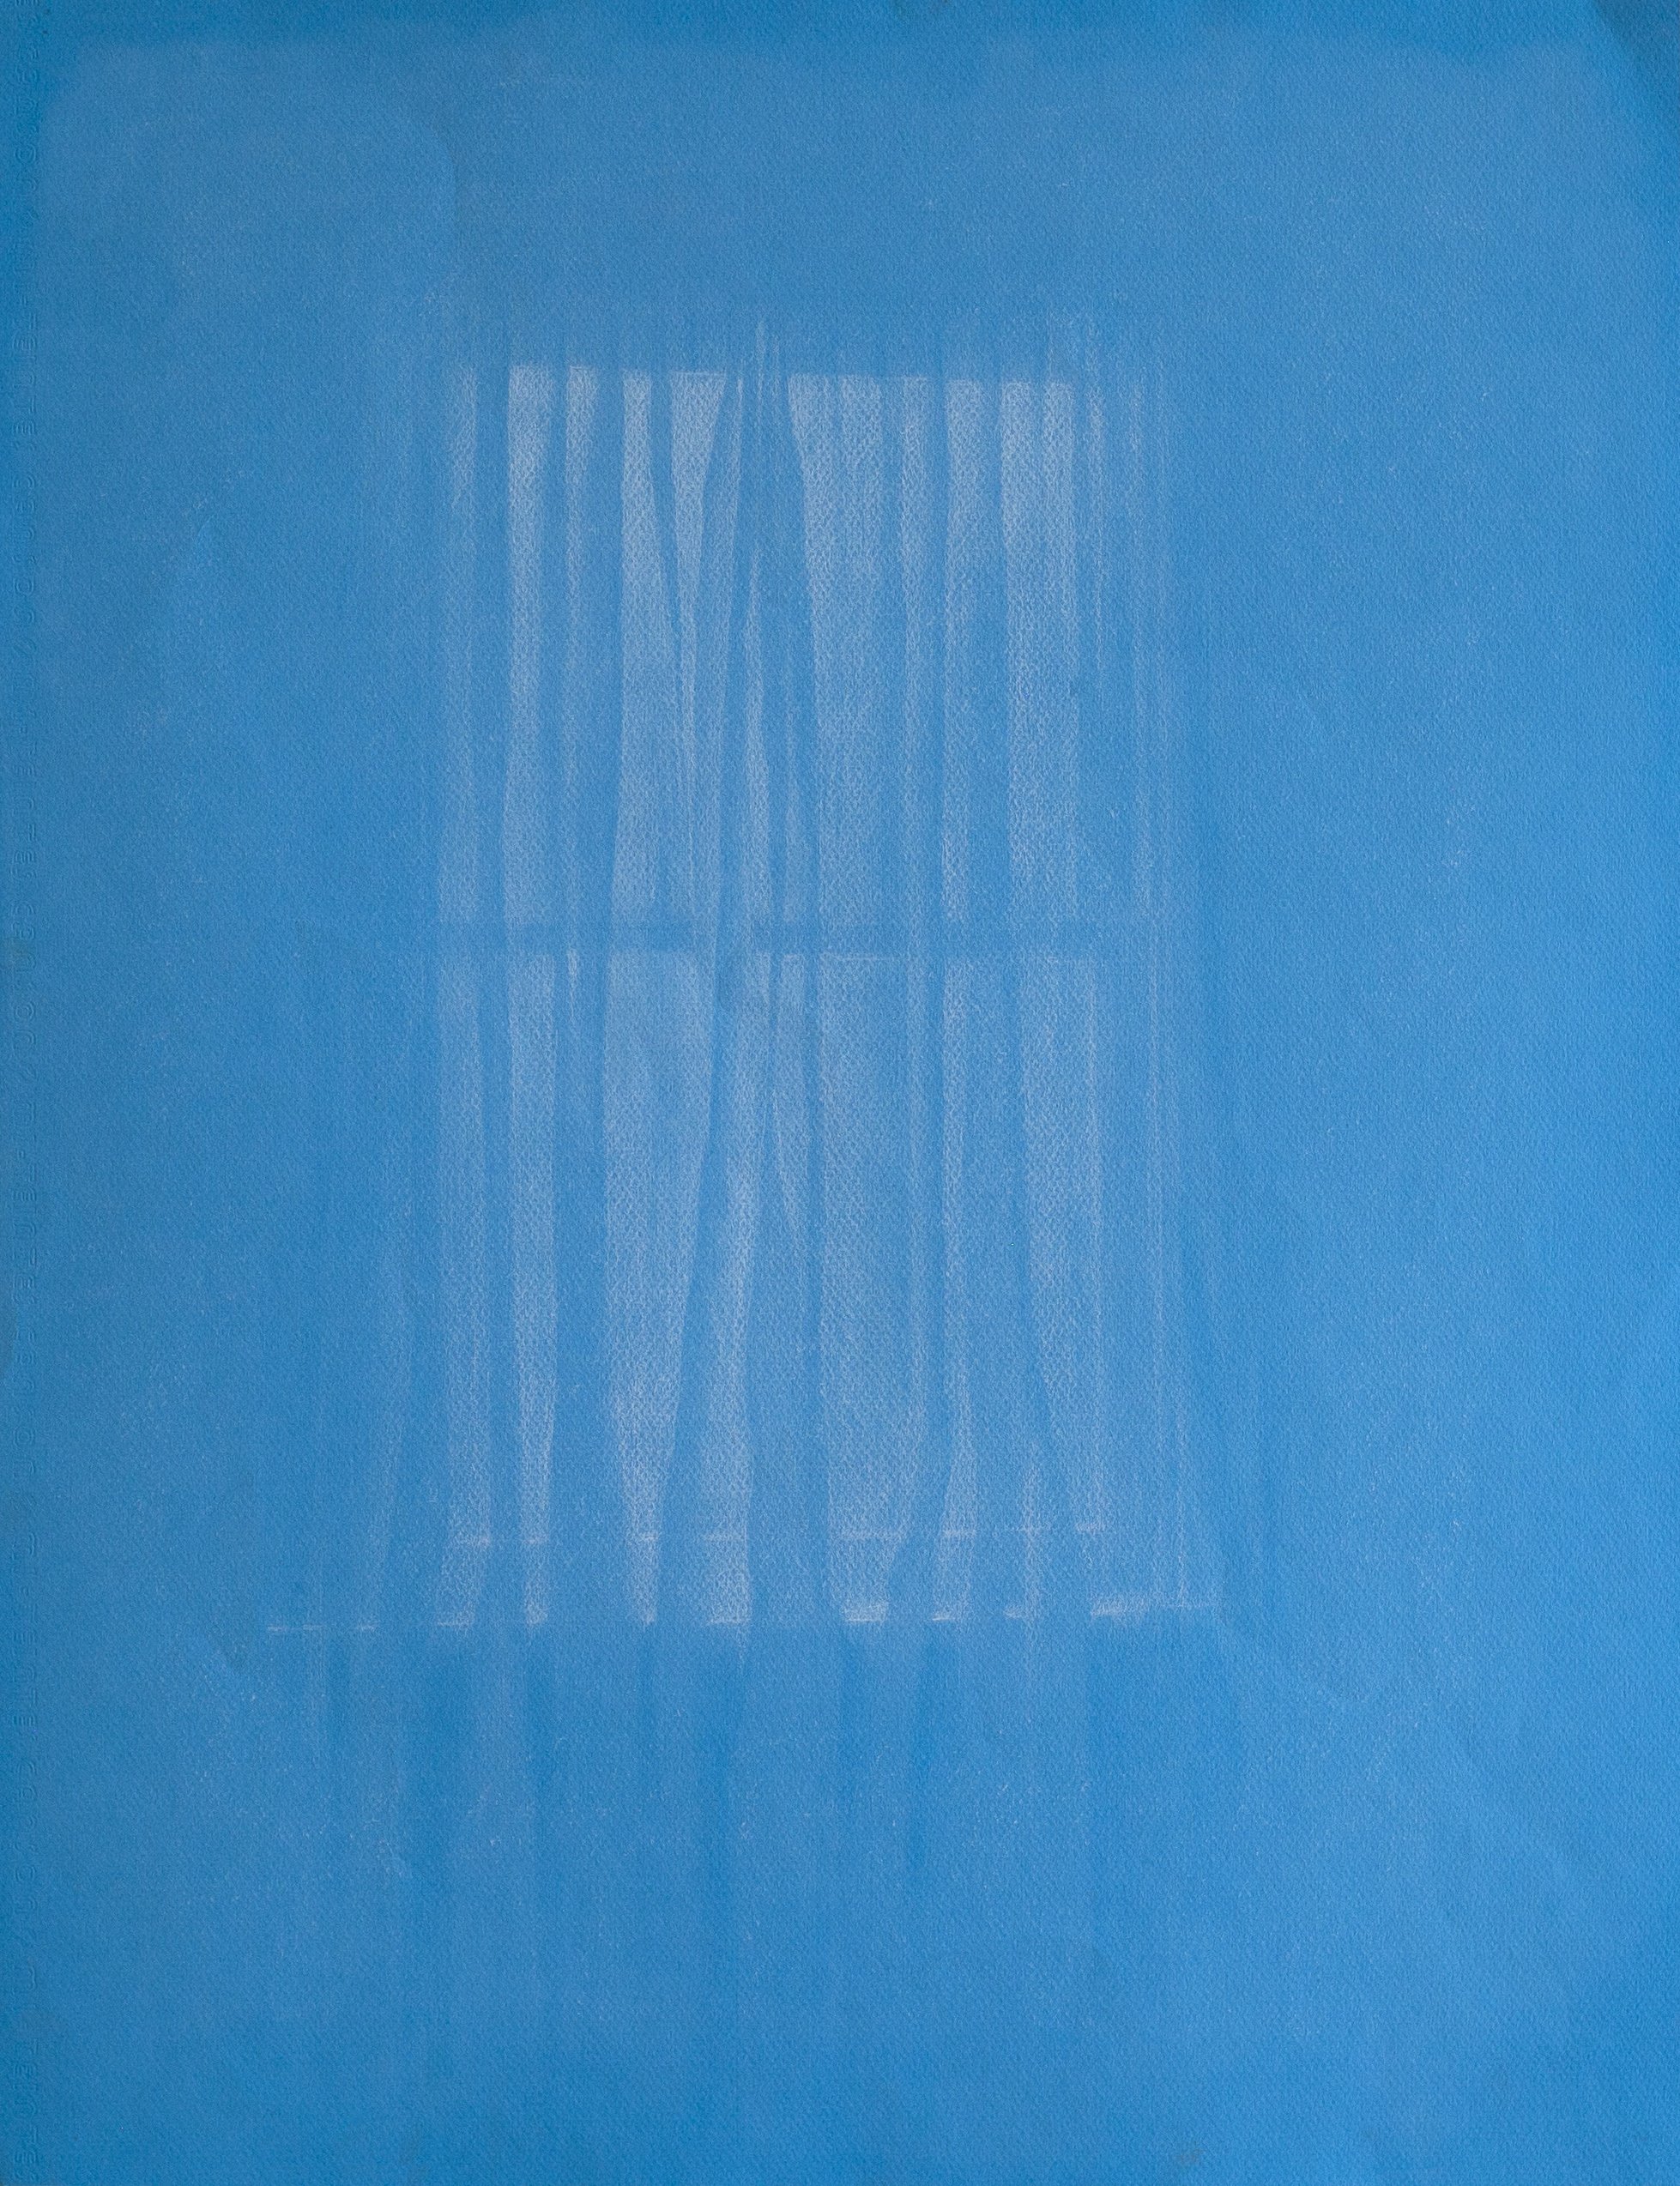 Miguel_Curtains_Charcoal on Paper.jpg